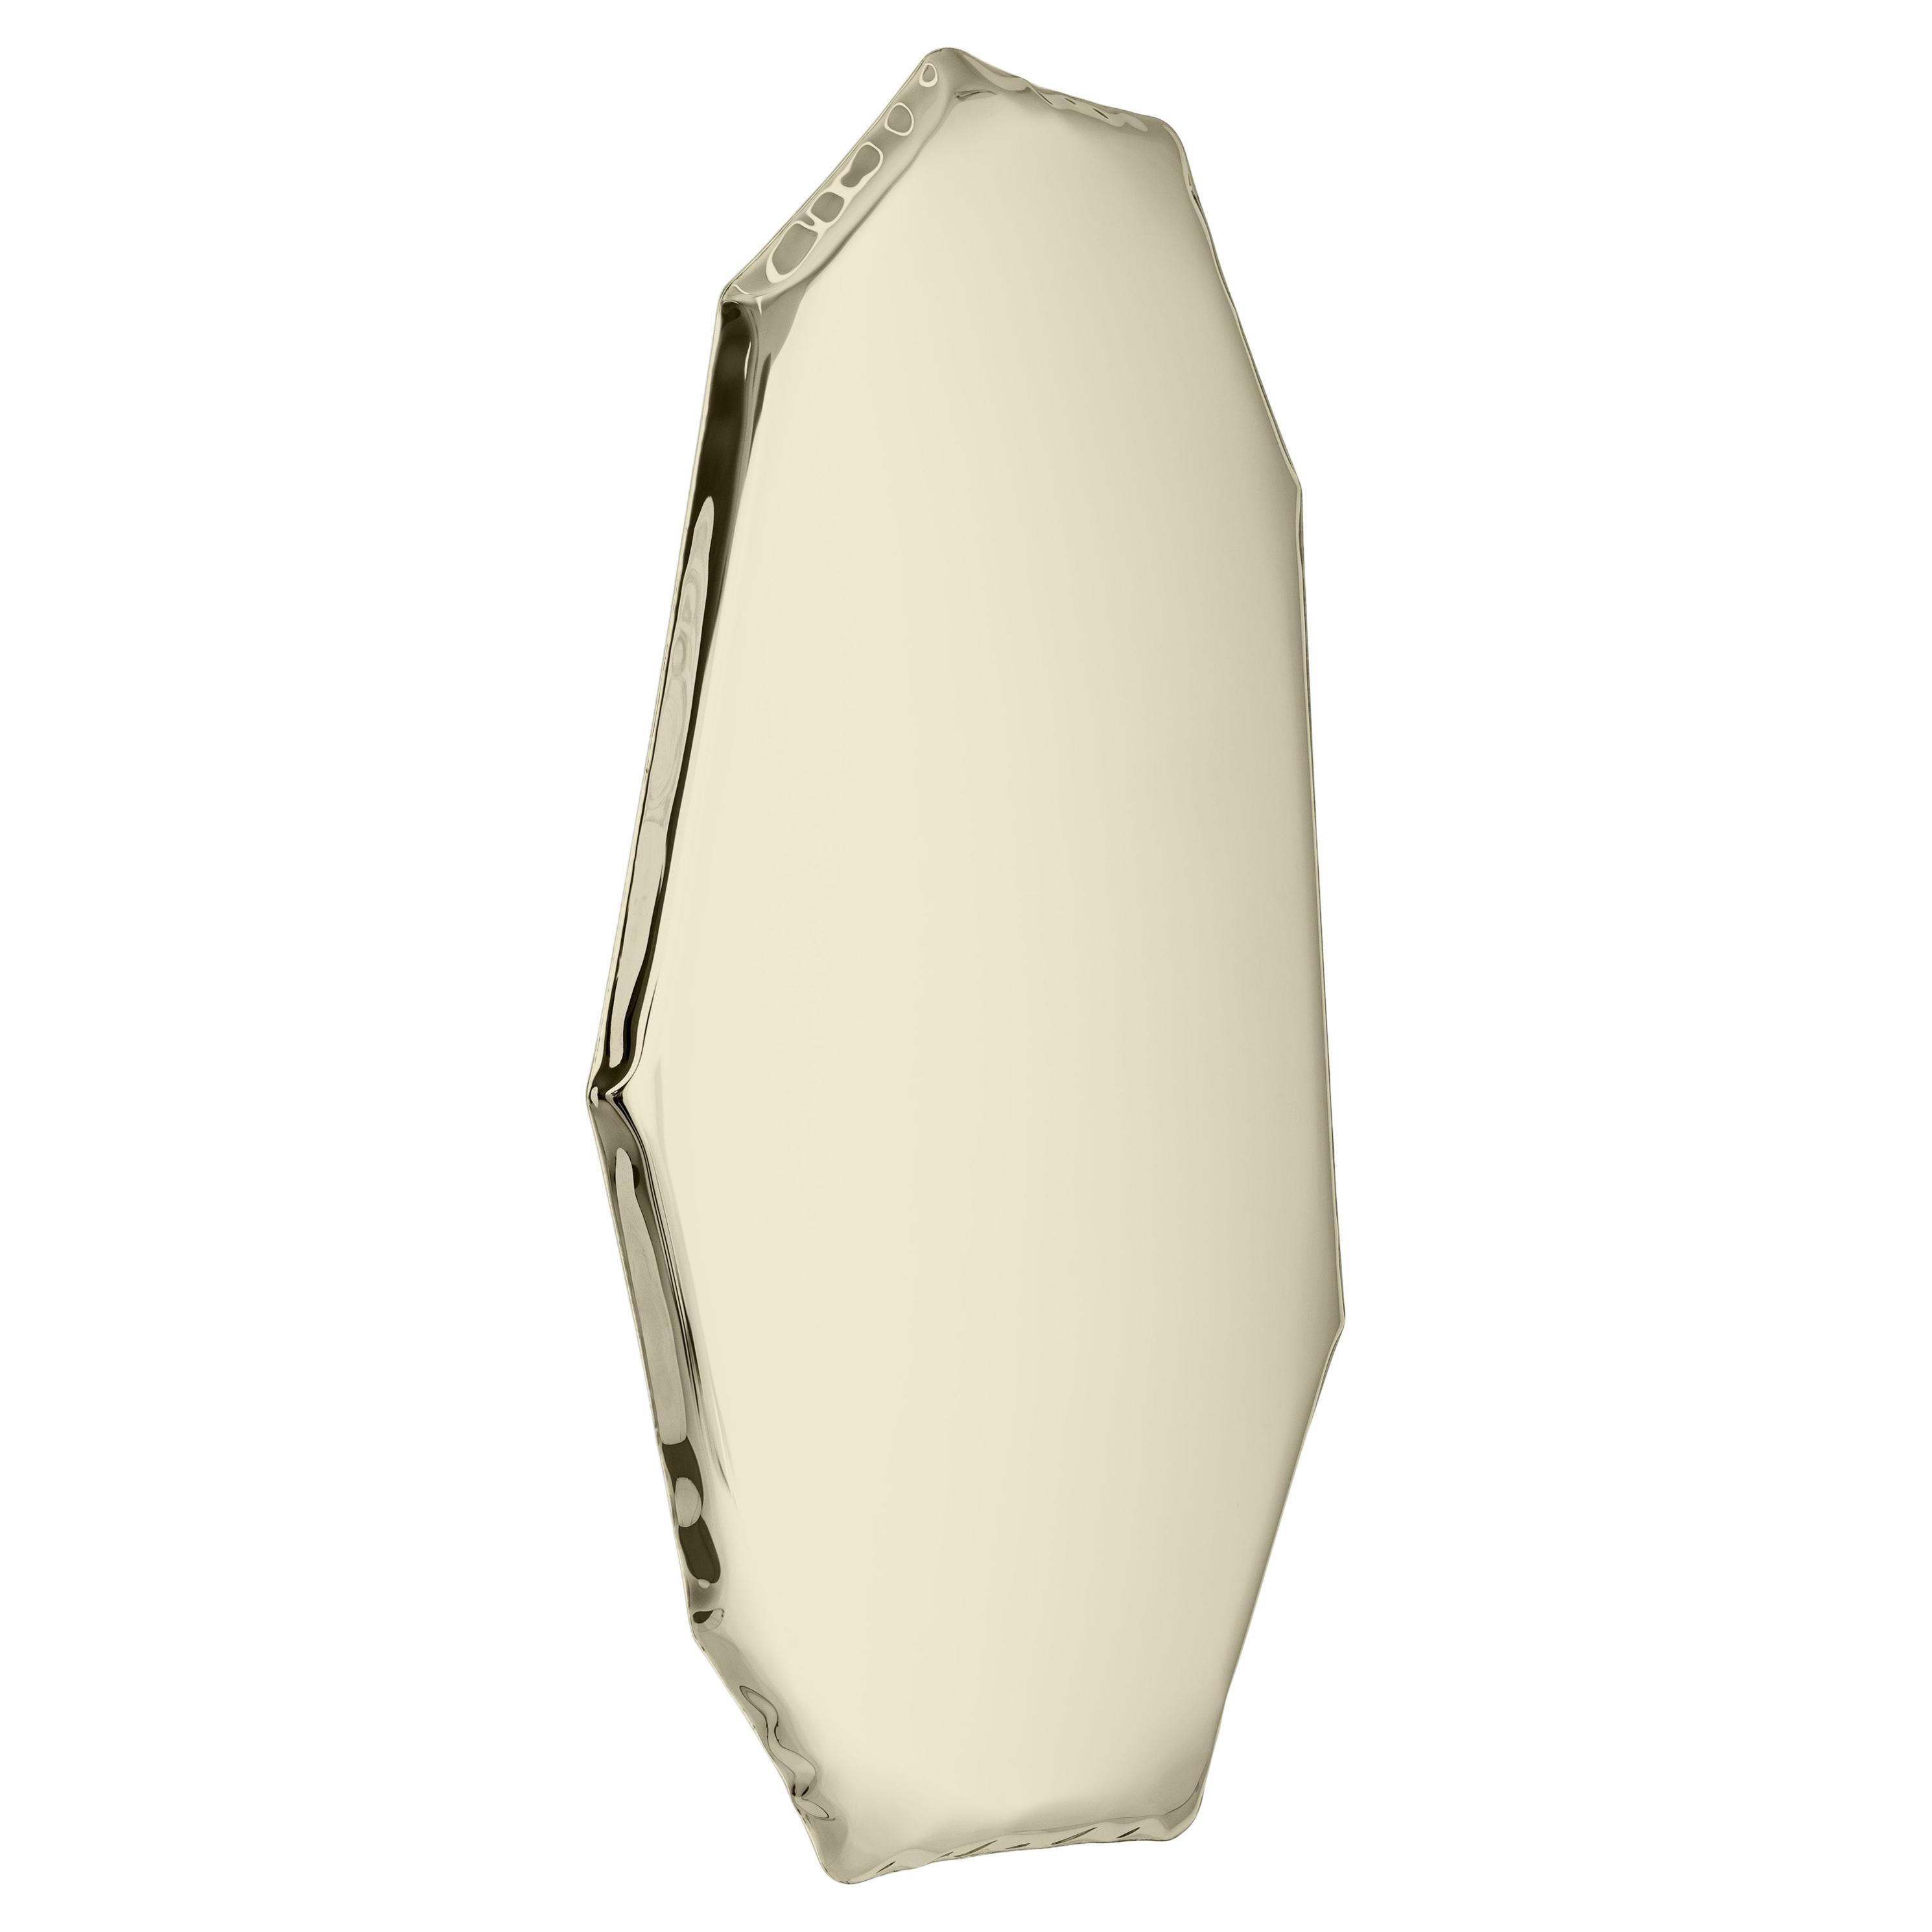 Tafla C3 Polished Stainless Steel Light Gold Color Wall Mirror by Zieta For Sale